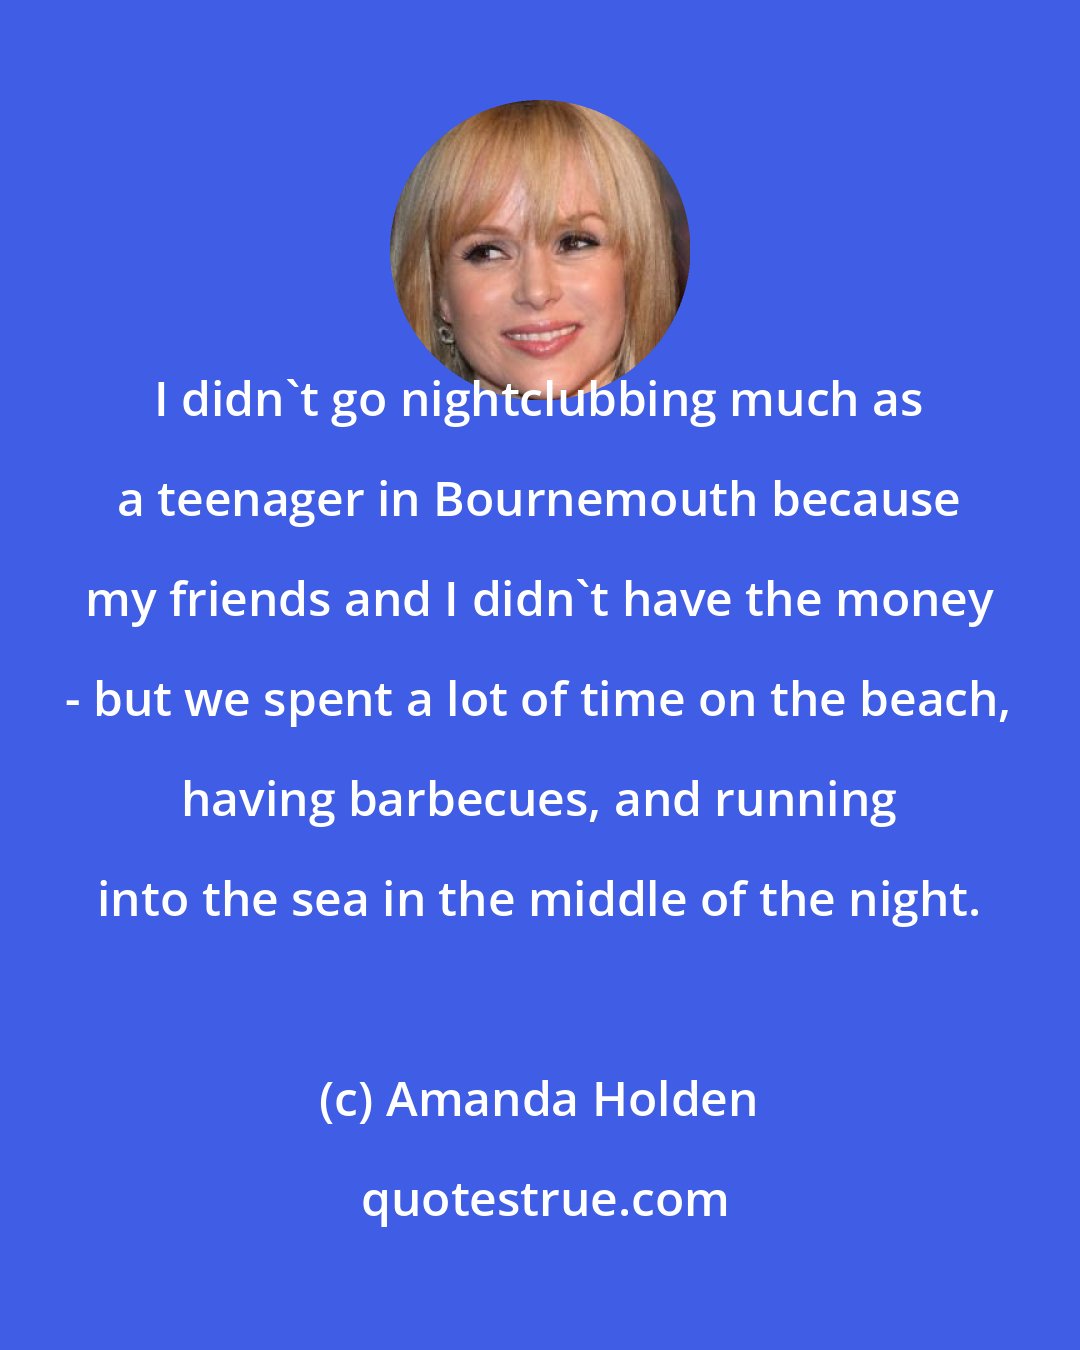 Amanda Holden: I didn't go nightclubbing much as a teenager in Bournemouth because my friends and I didn't have the money - but we spent a lot of time on the beach, having barbecues, and running into the sea in the middle of the night.